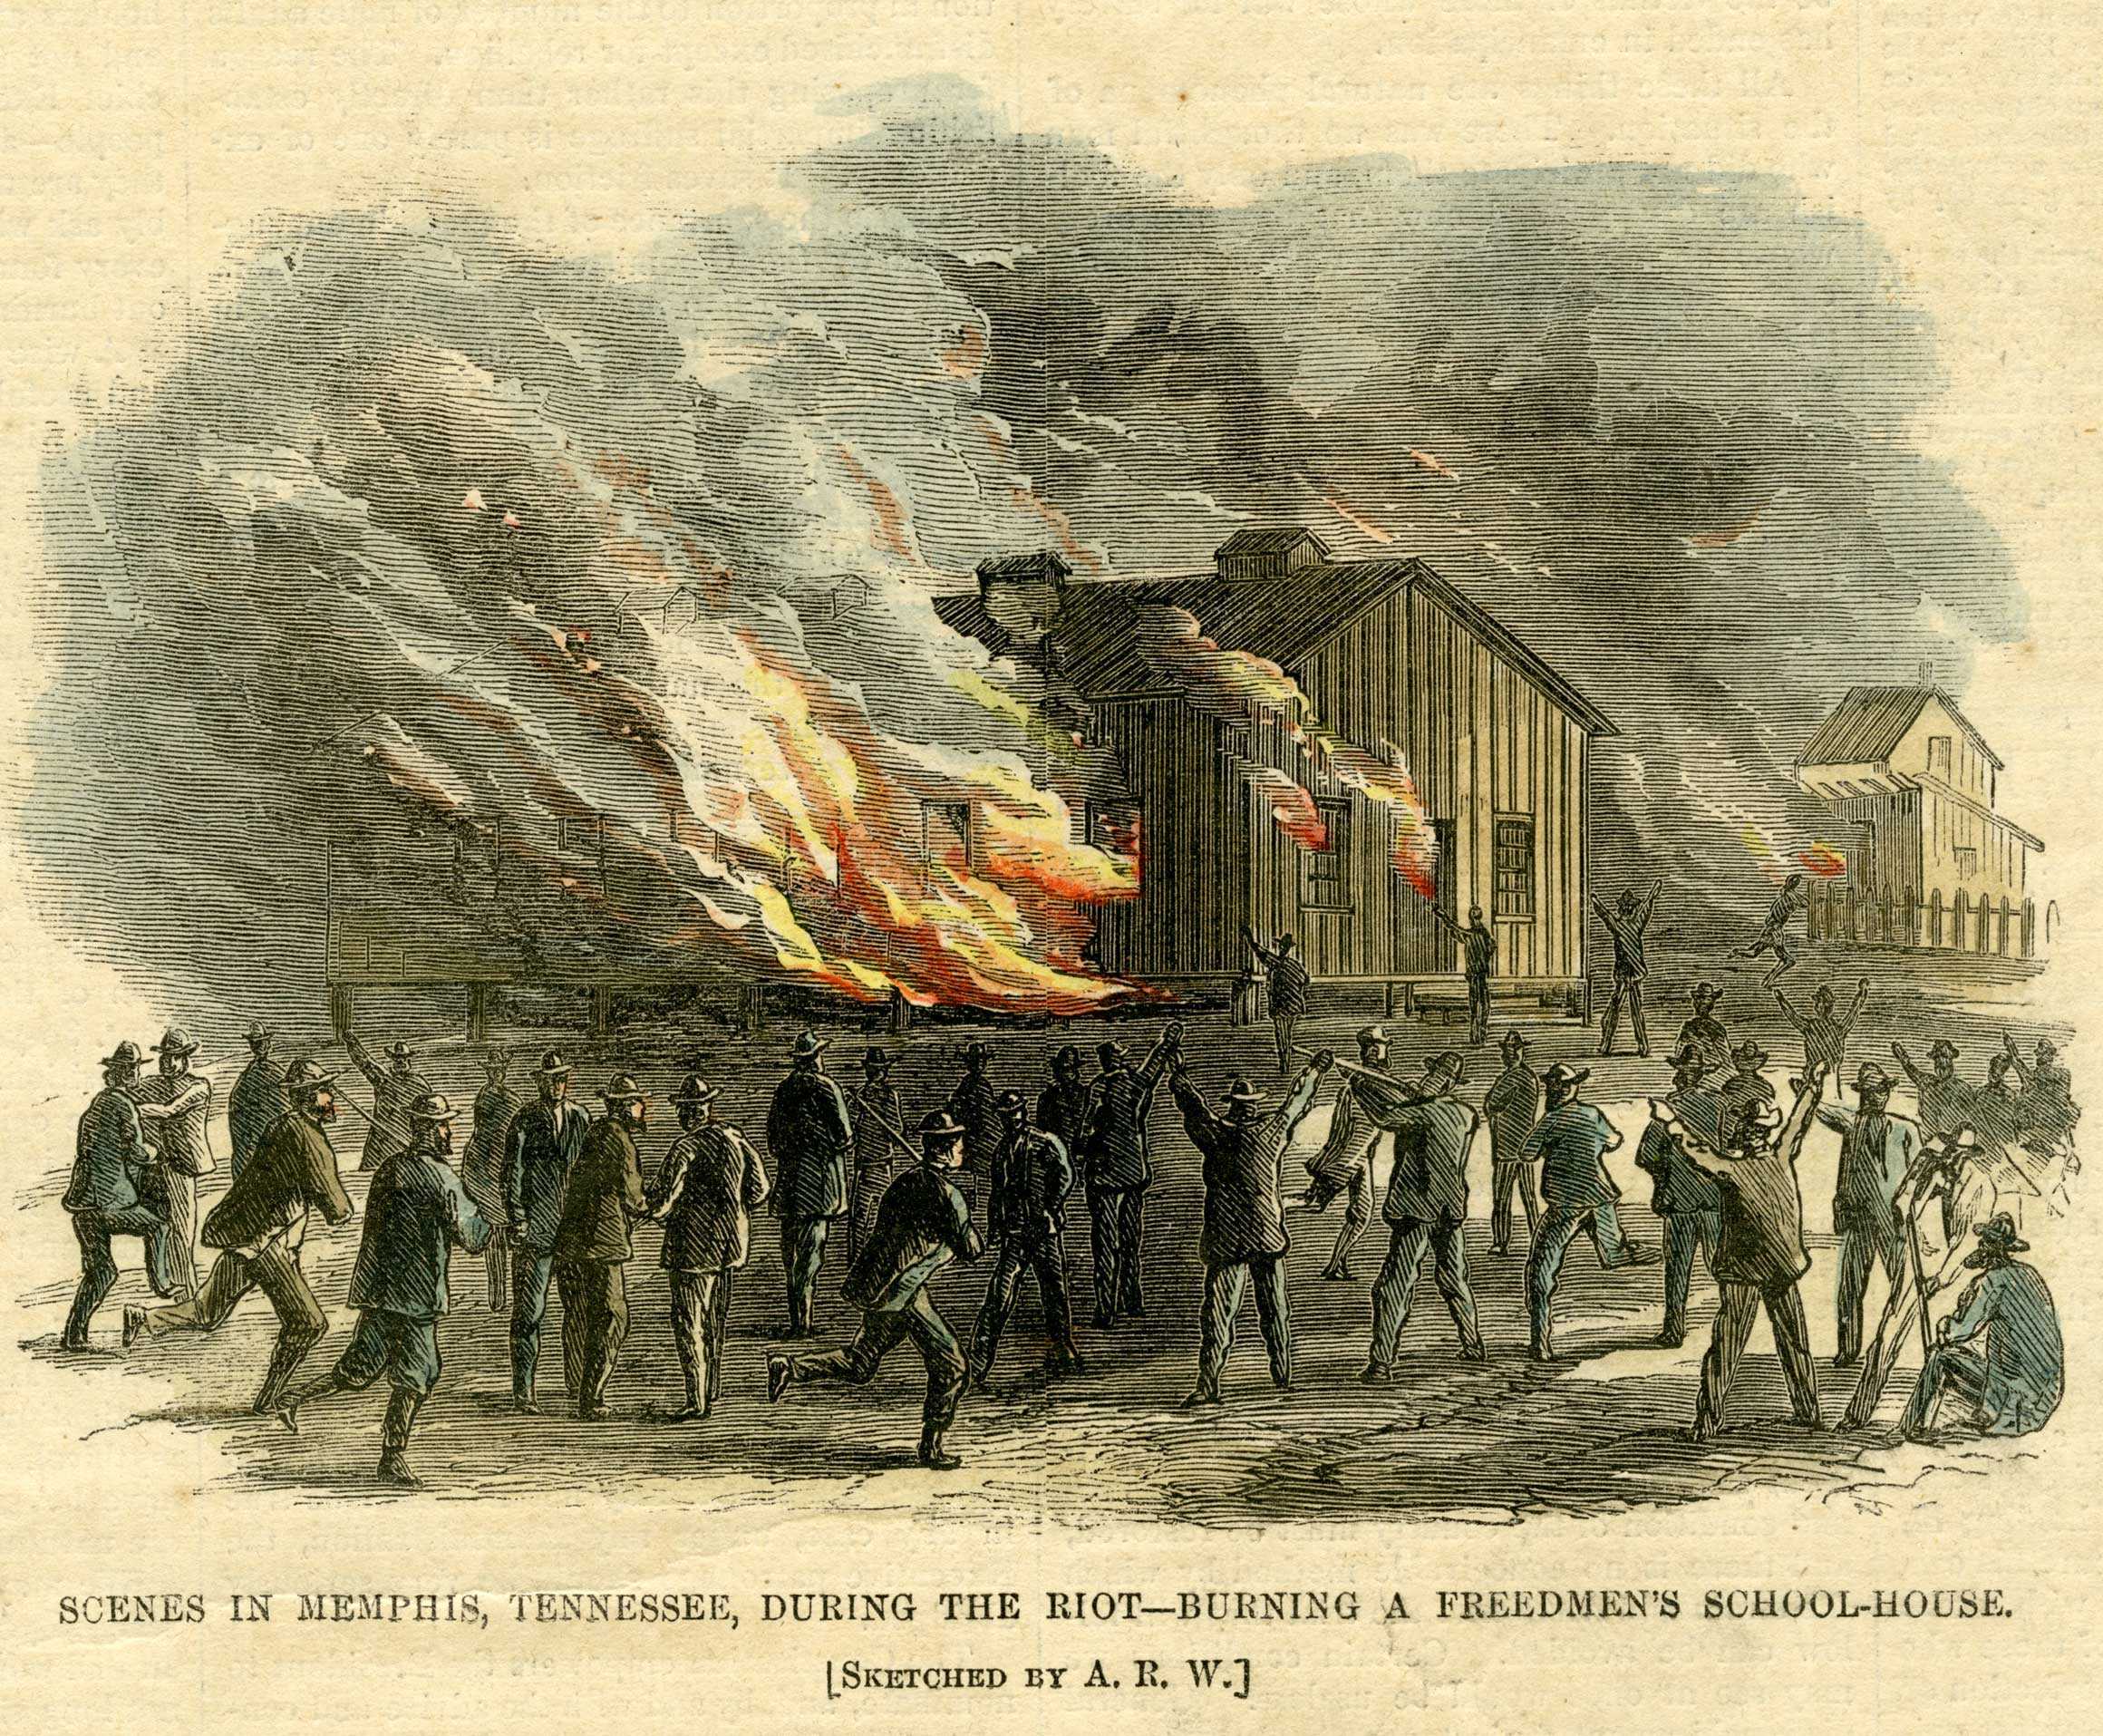 An illustration of a school house on fire. Some onlookers cheer, while others run towards help.